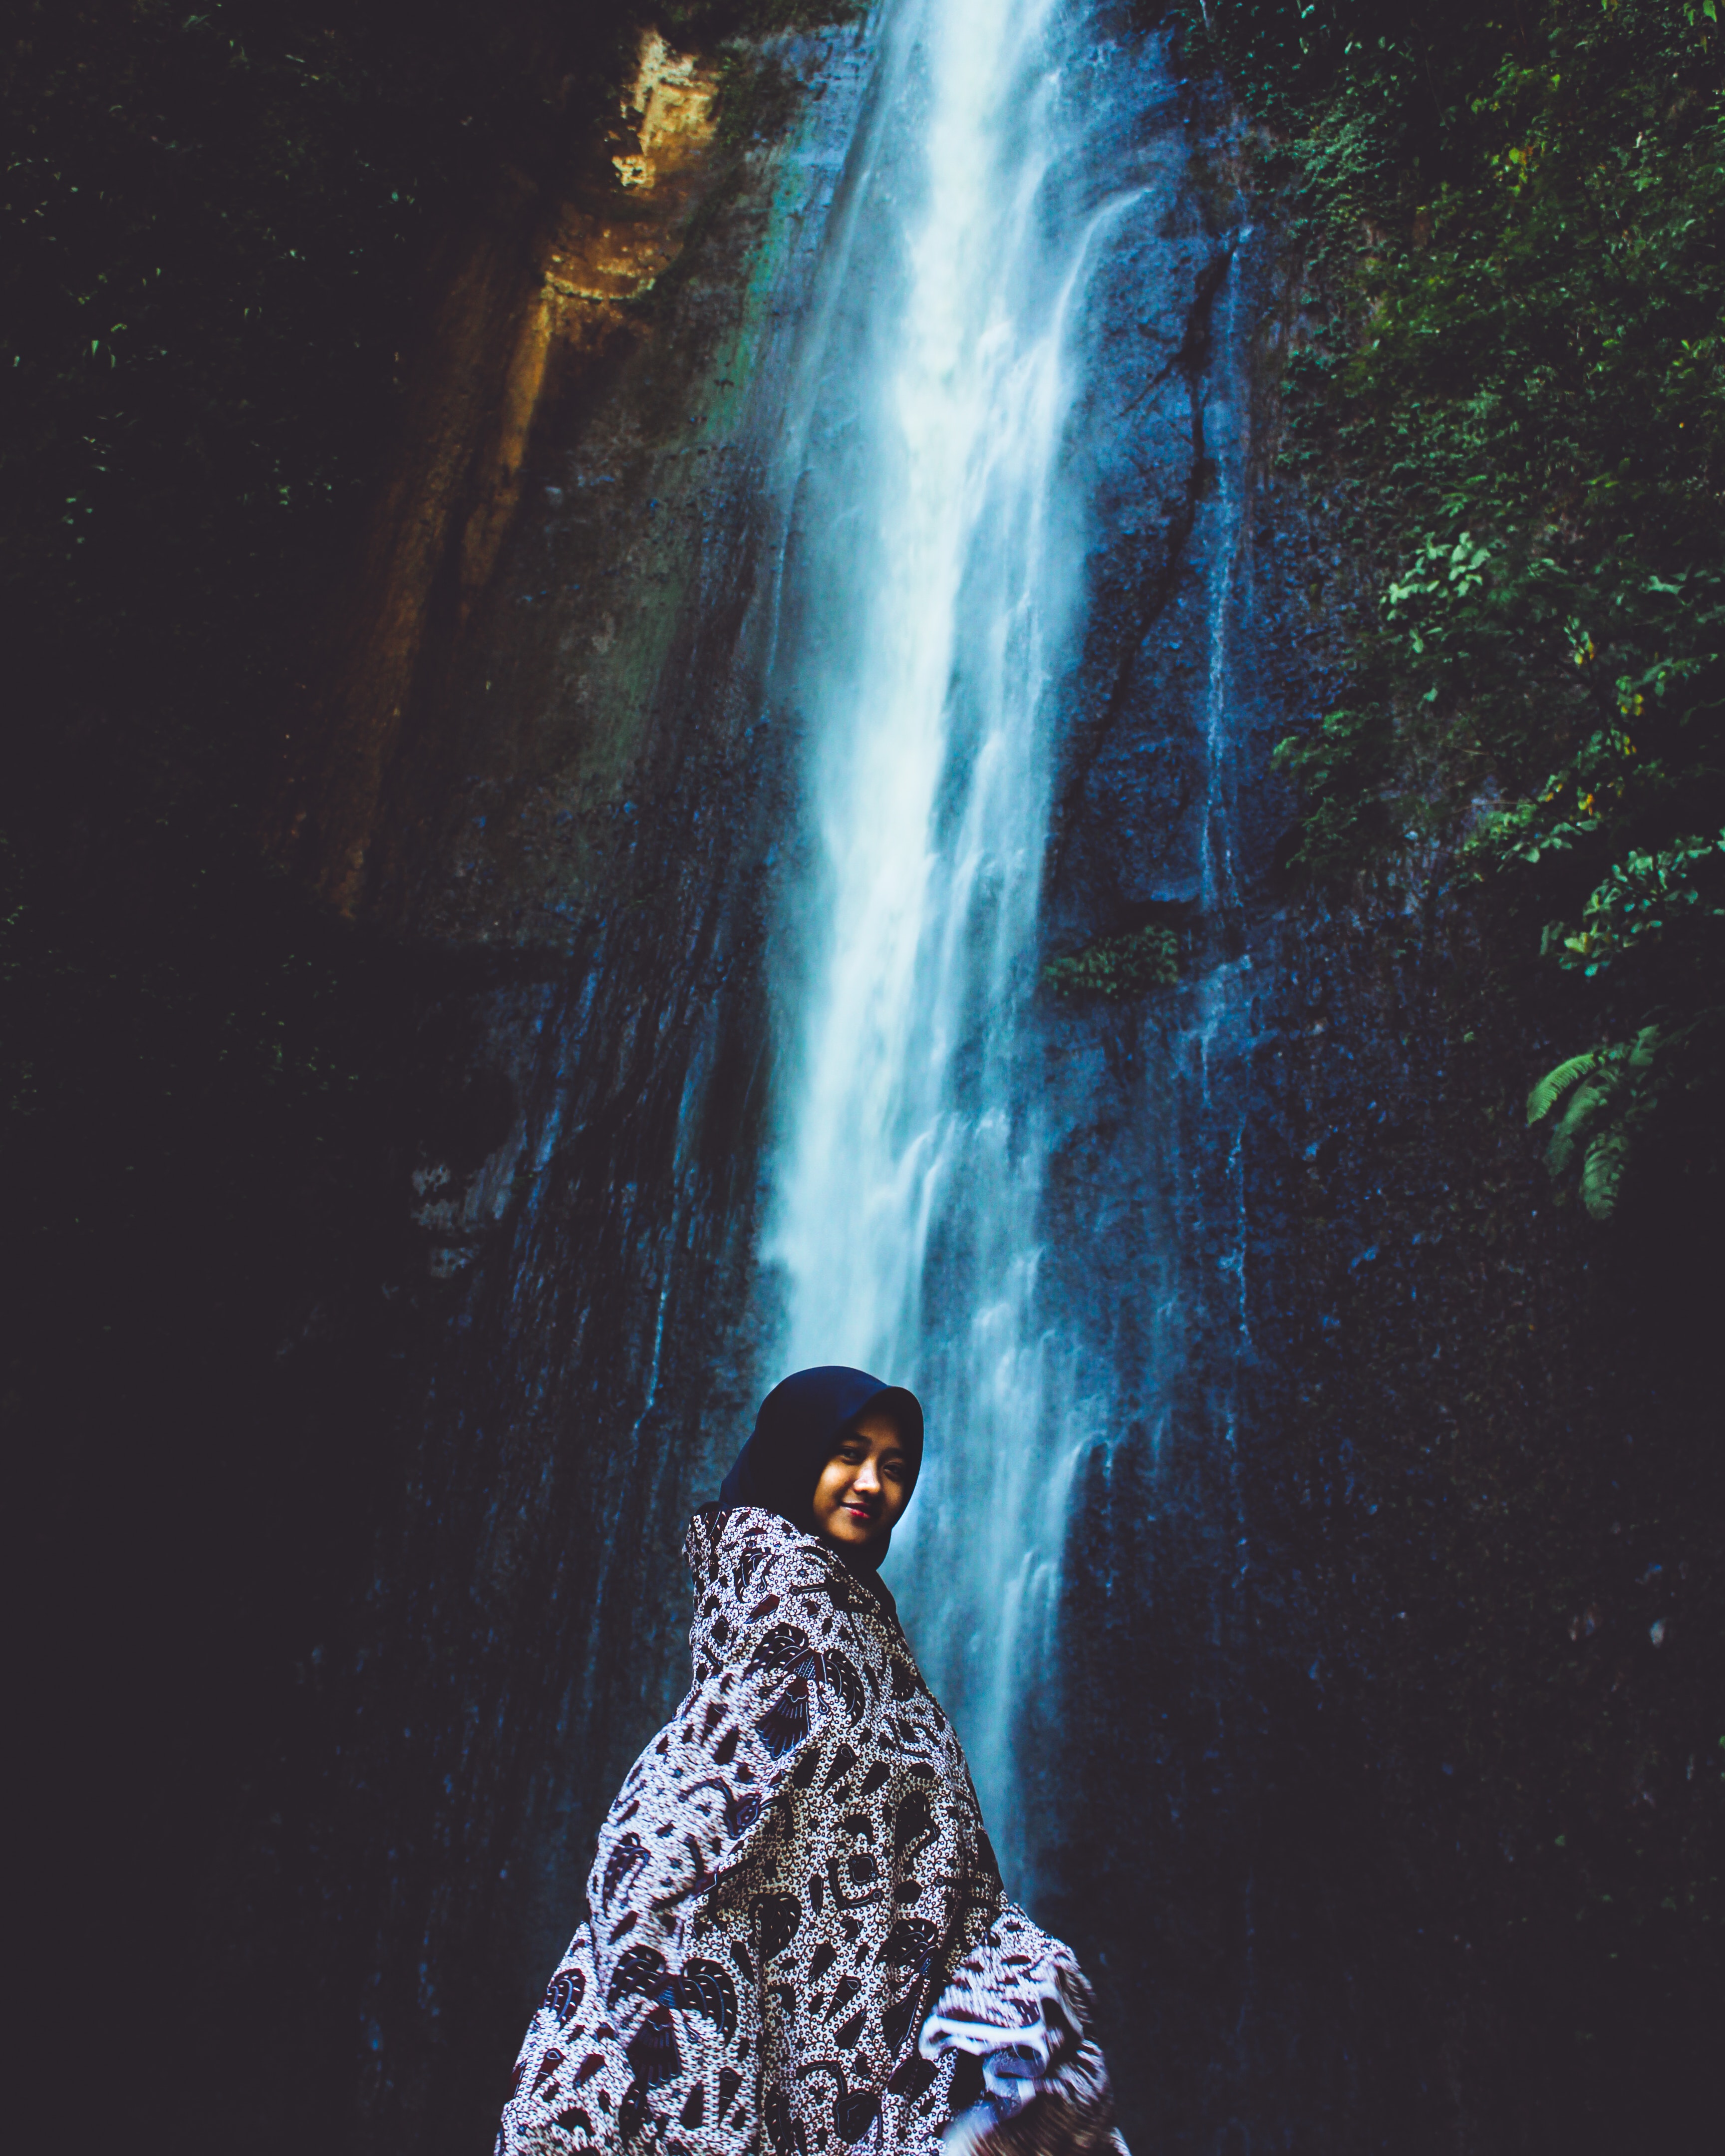 Woman in Front Waterfall, H2o, Human, Landscape, Natural, HQ Photo